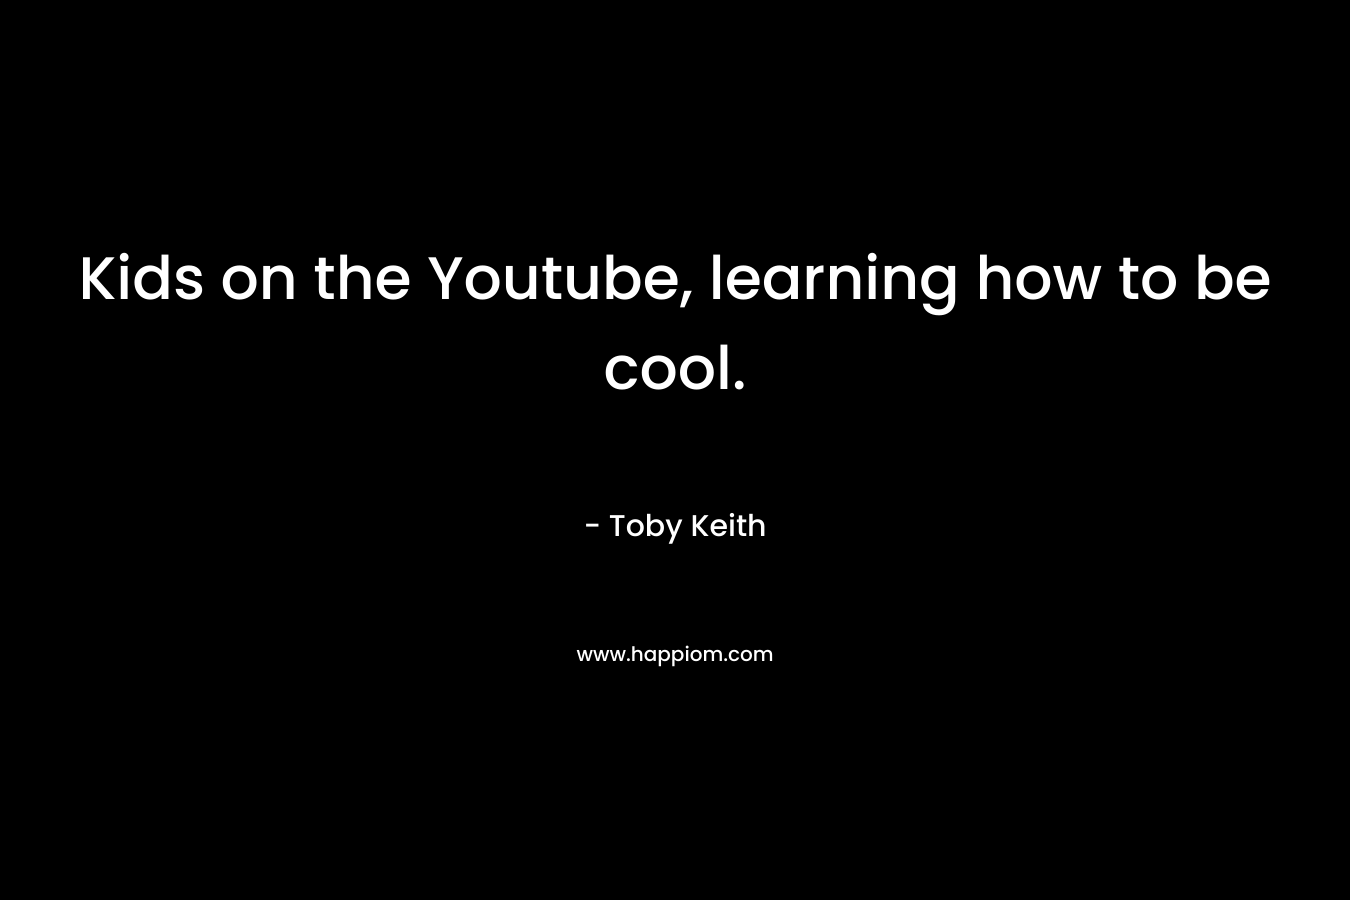 Kids on the Youtube, learning how to be cool. – Toby Keith